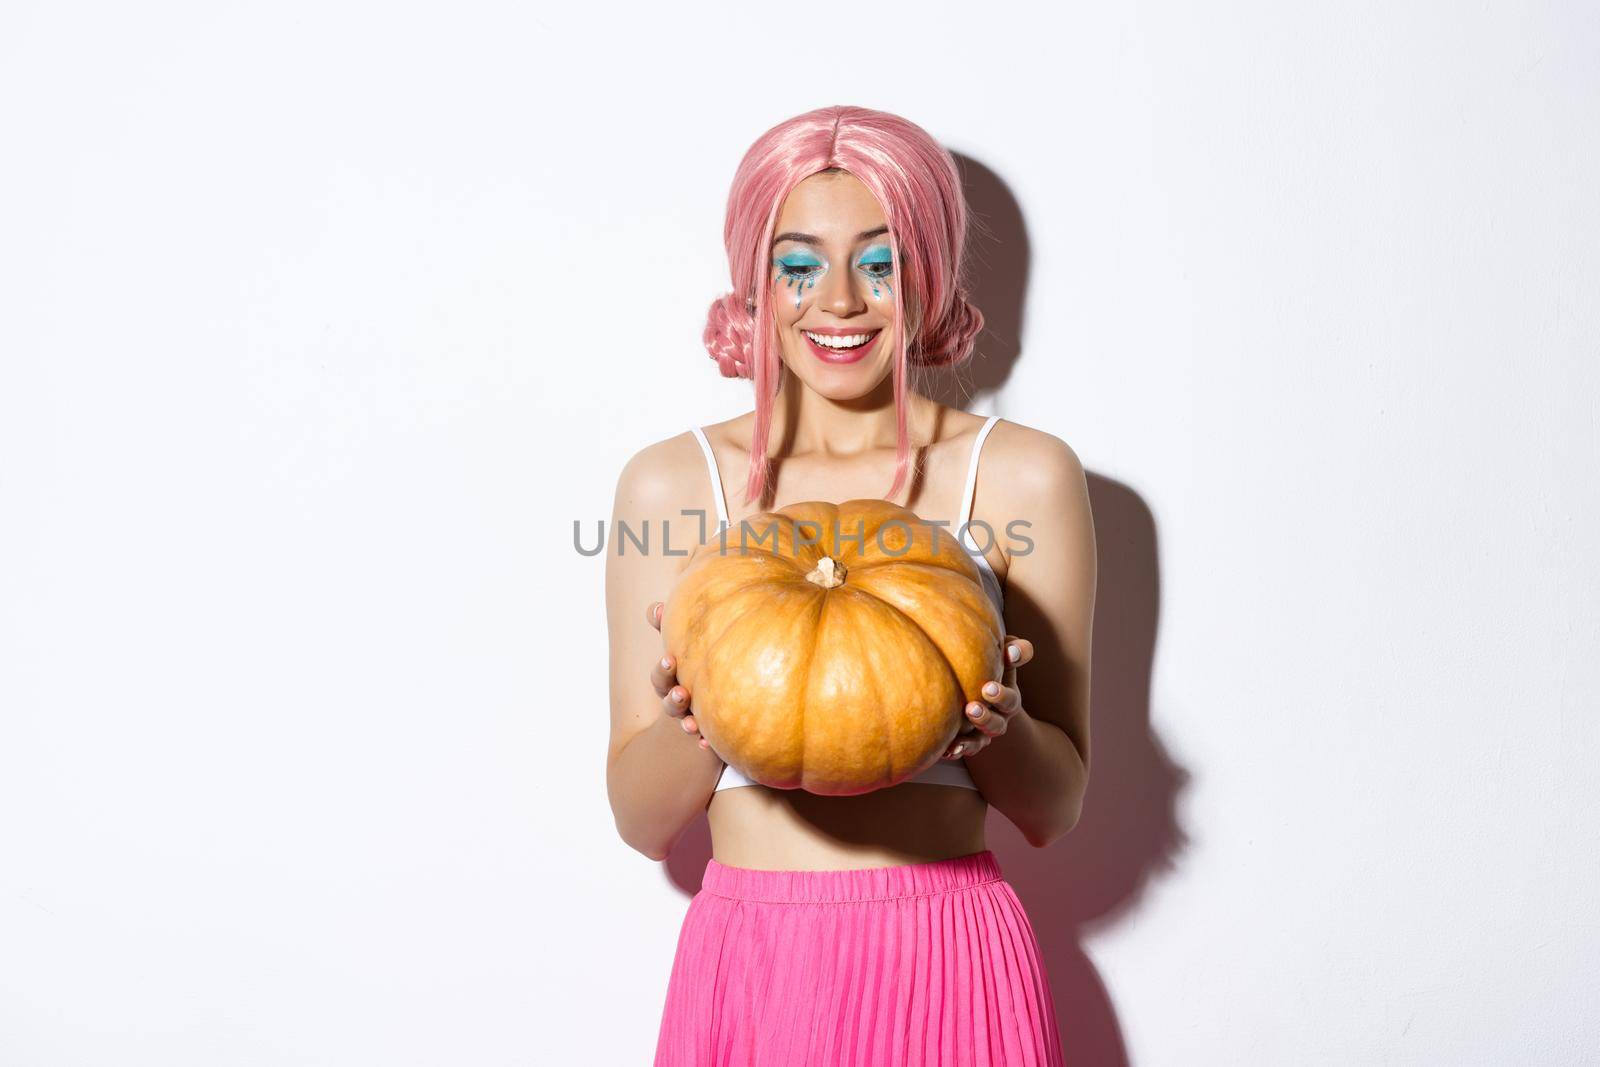 Portrait of cheerful woman with pink wig and bright makeup, looking happy at pumpkin for halloween, standing over white background.